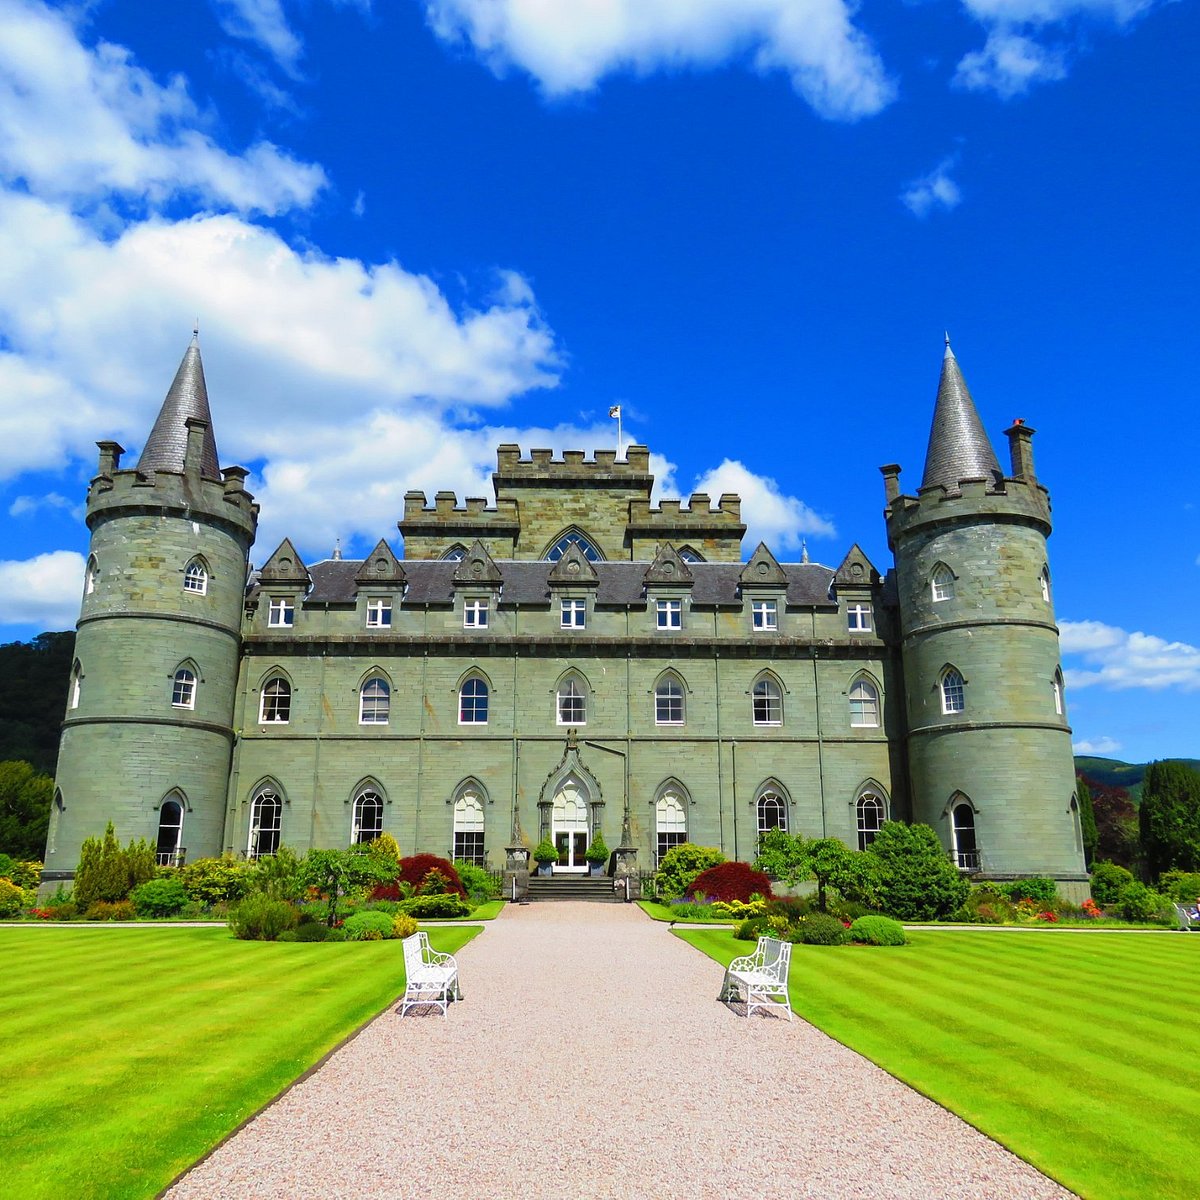 scottish_gaelic_caisteal_inbhir_aora_is_a_country_house_near_inveraray_in_the_county_of_argyll.jpg